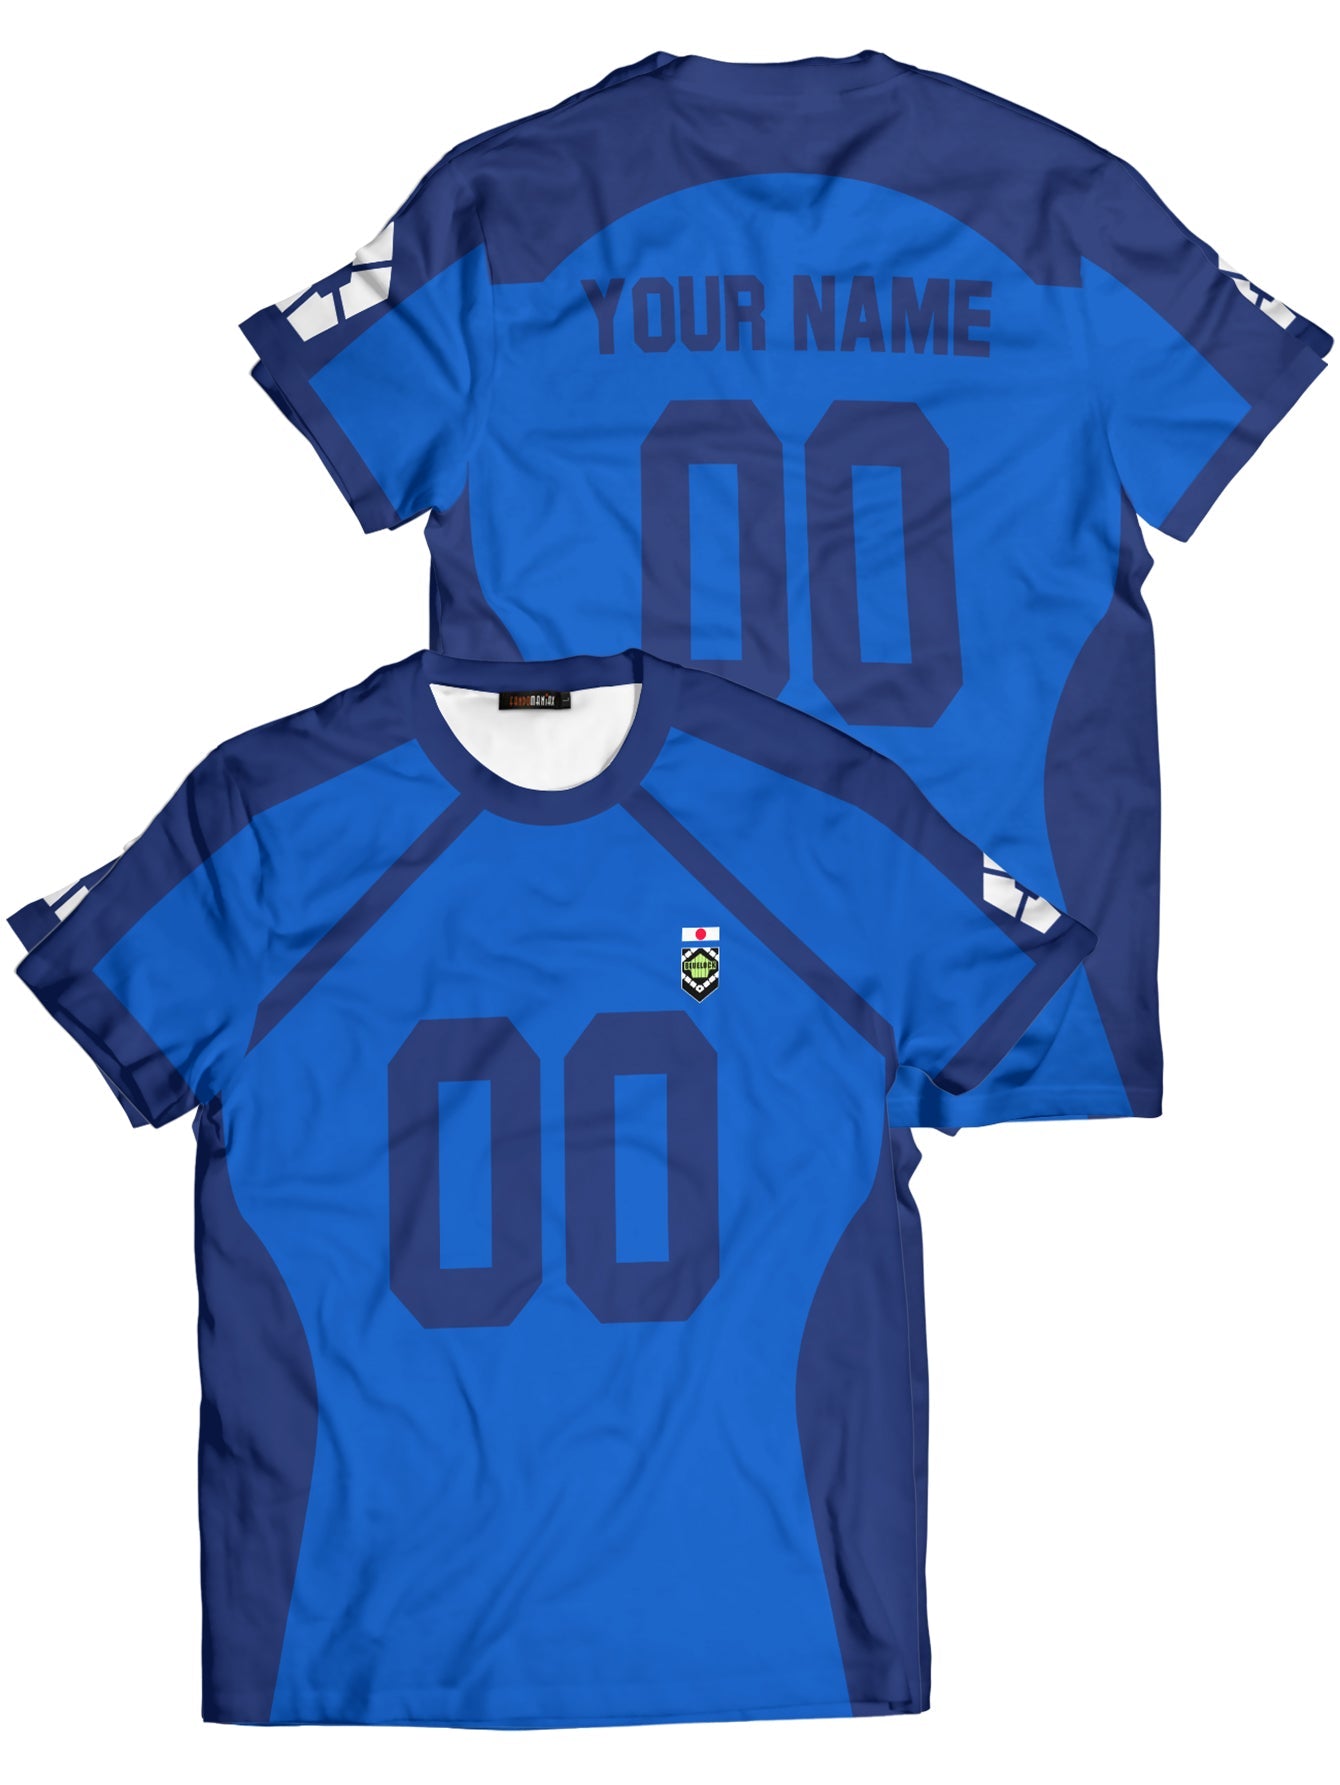 Youth Personalized Football Jersey Team Shirts Name Number -  New  Zealand